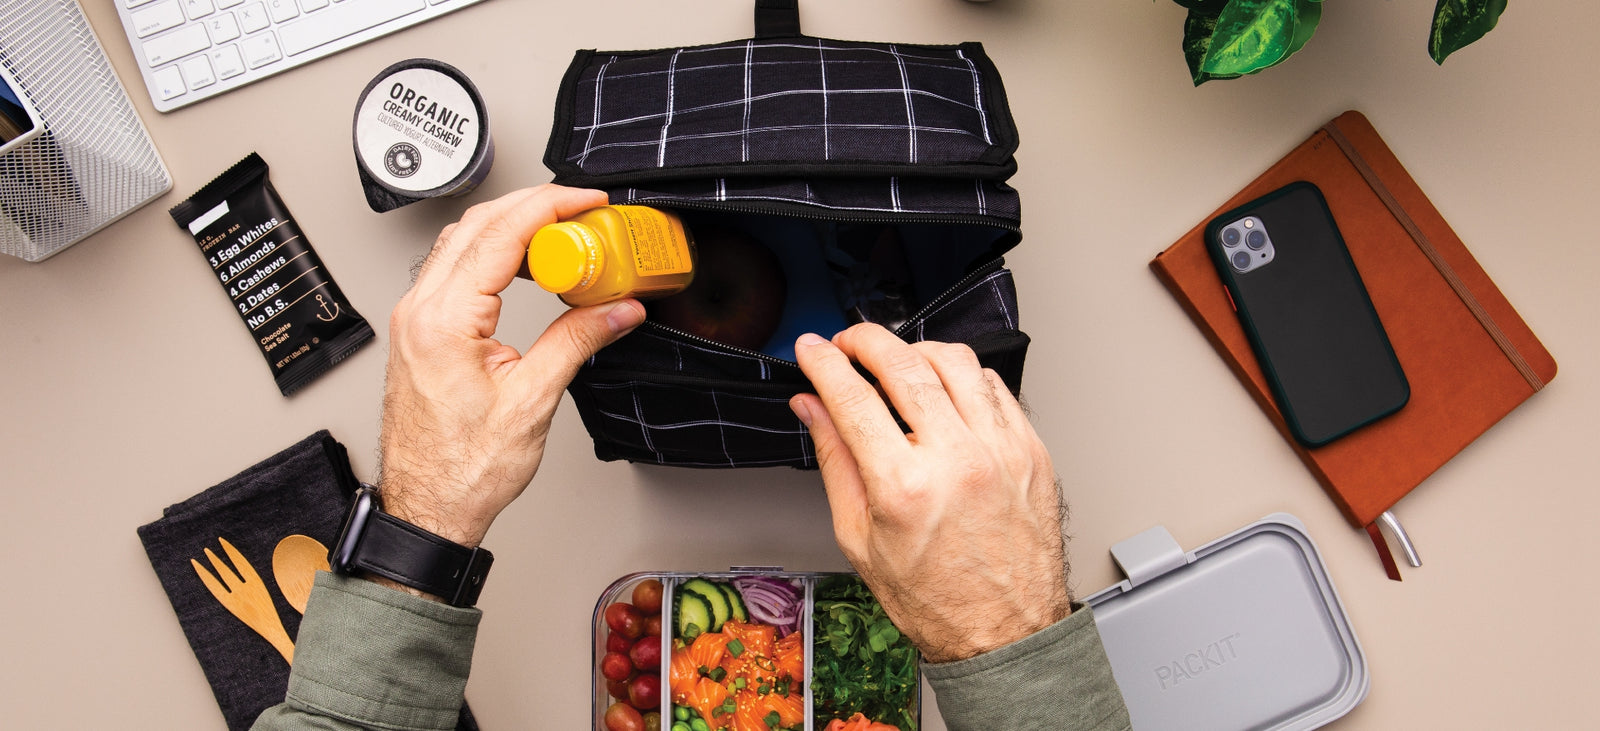 This freezable lunchbox keeps food cold for hours without ice packs